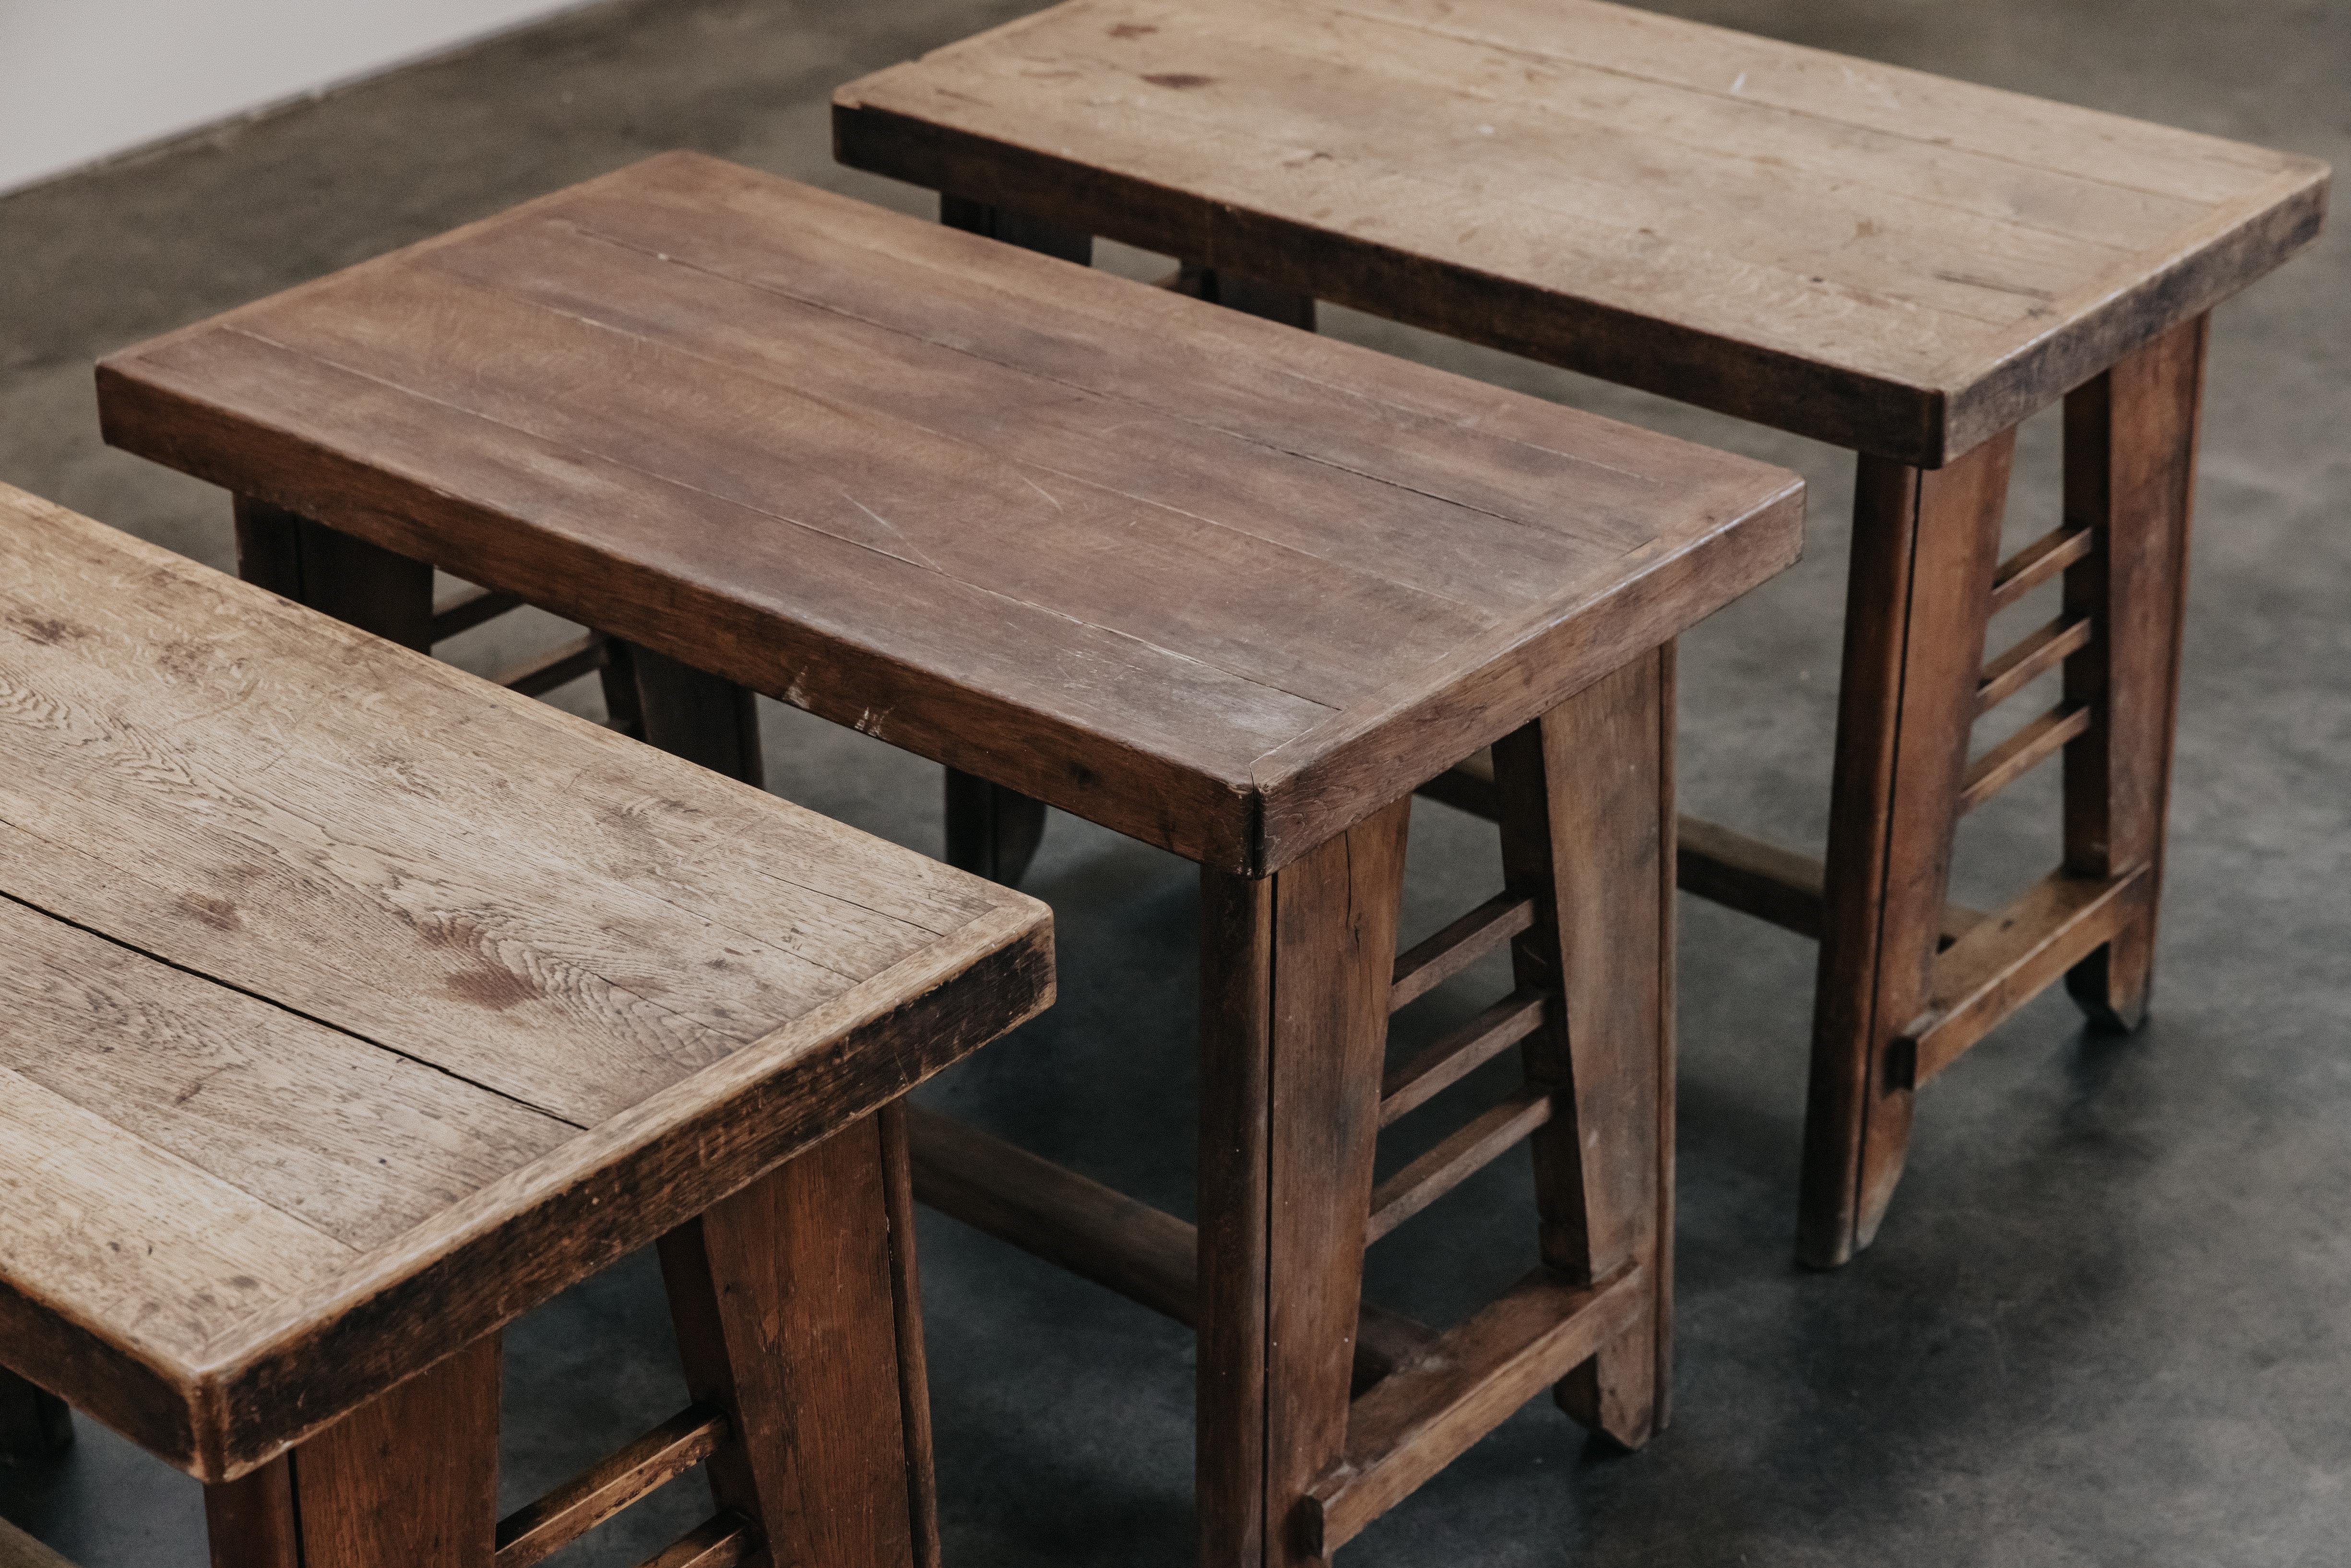 Vintage Set Of Oak Bistro Tables From France, Circa 1960.  Solid oak construction with fantastic original patina and use.